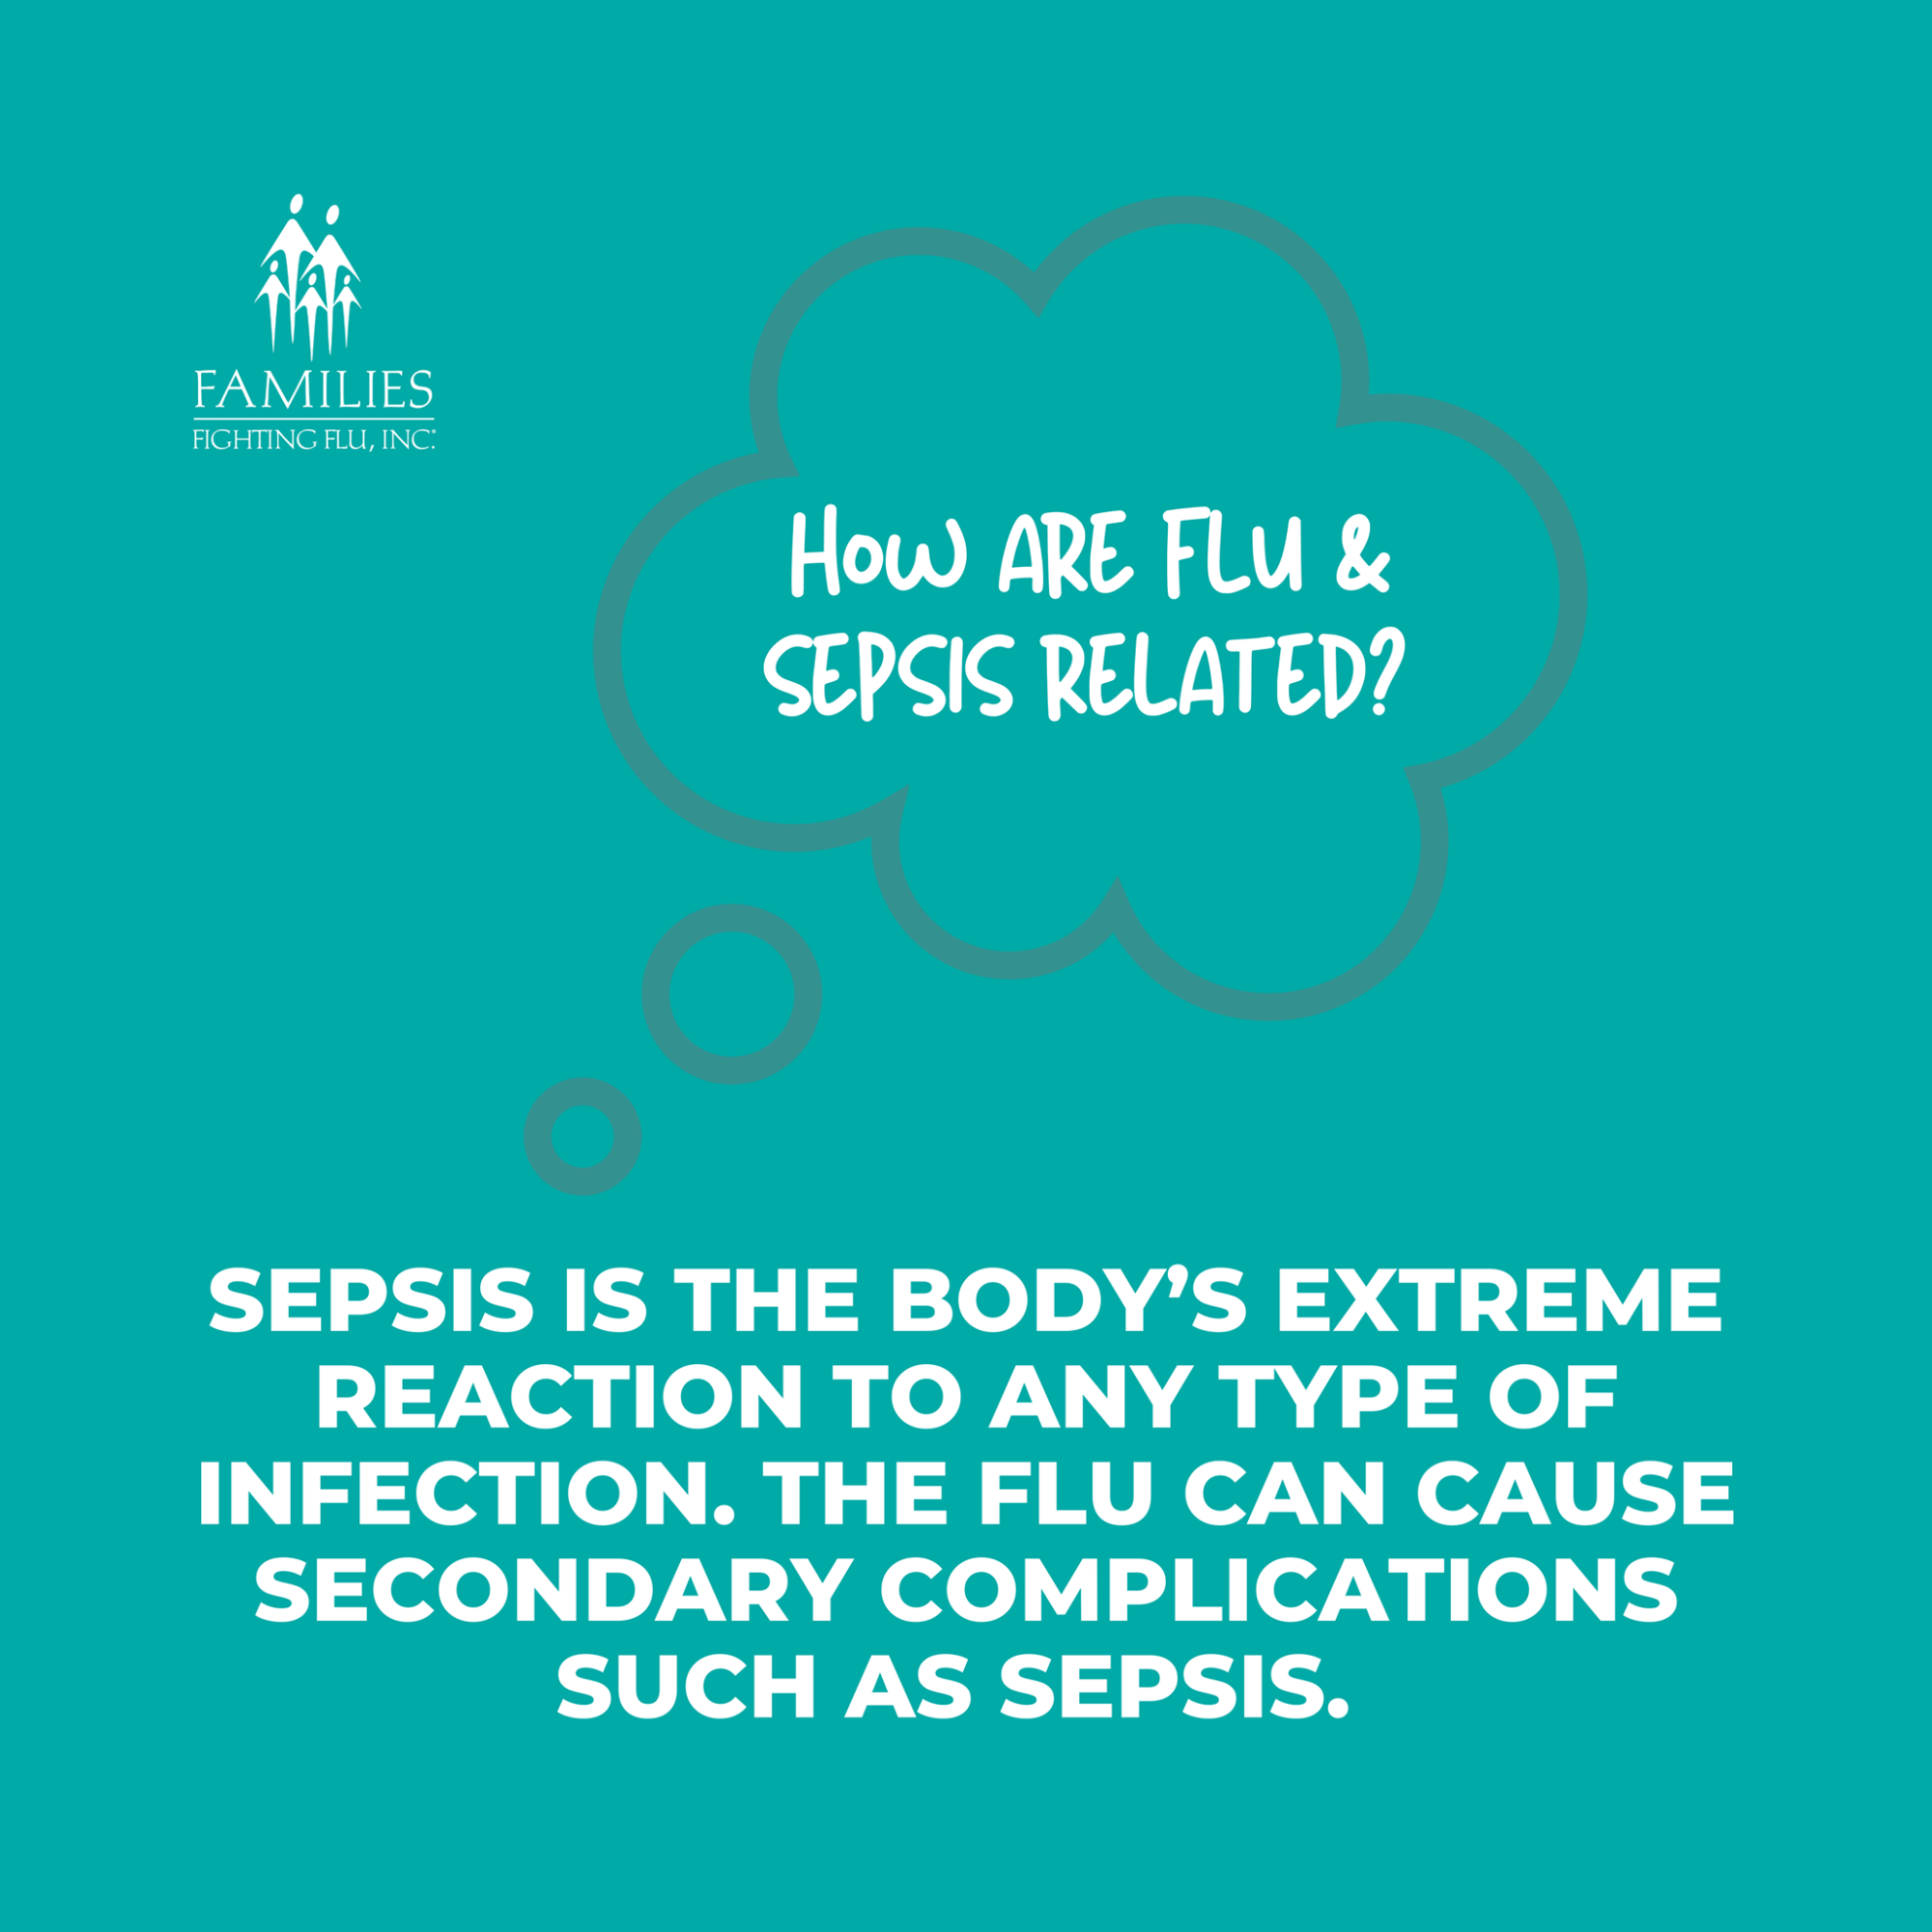 Flu and Sepsis